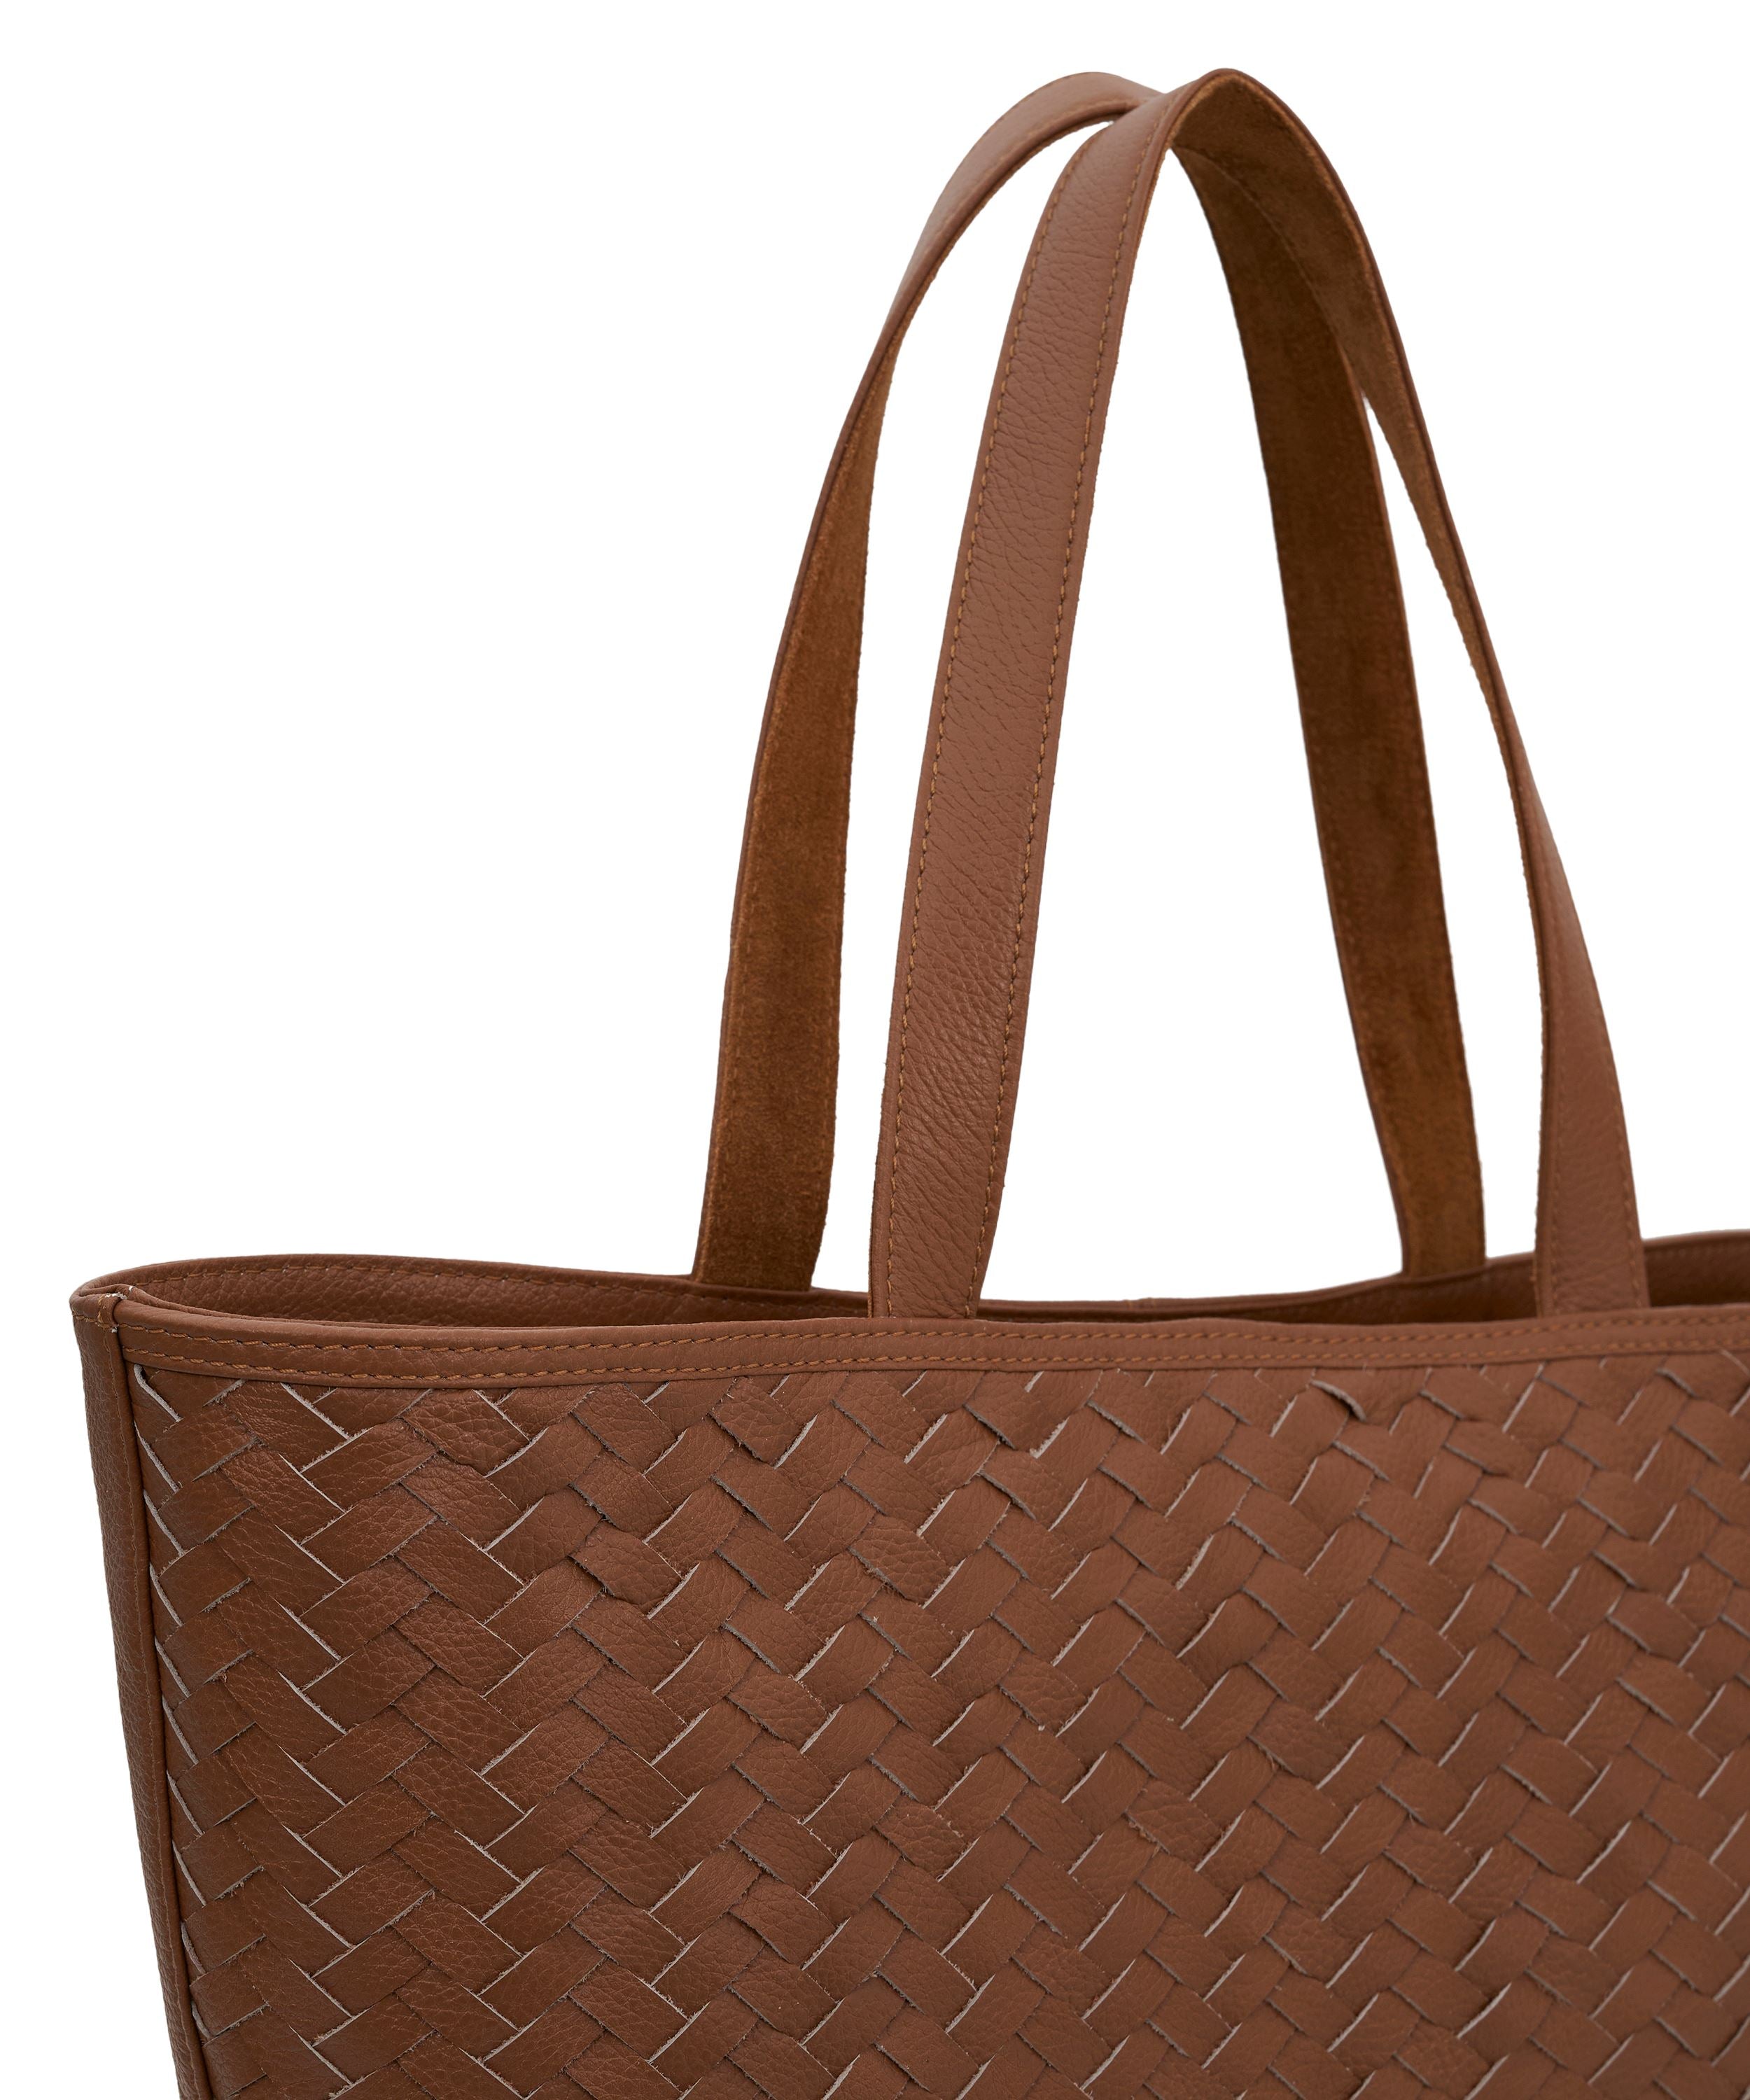 Woven Wonder Carryall in Distressed Tan